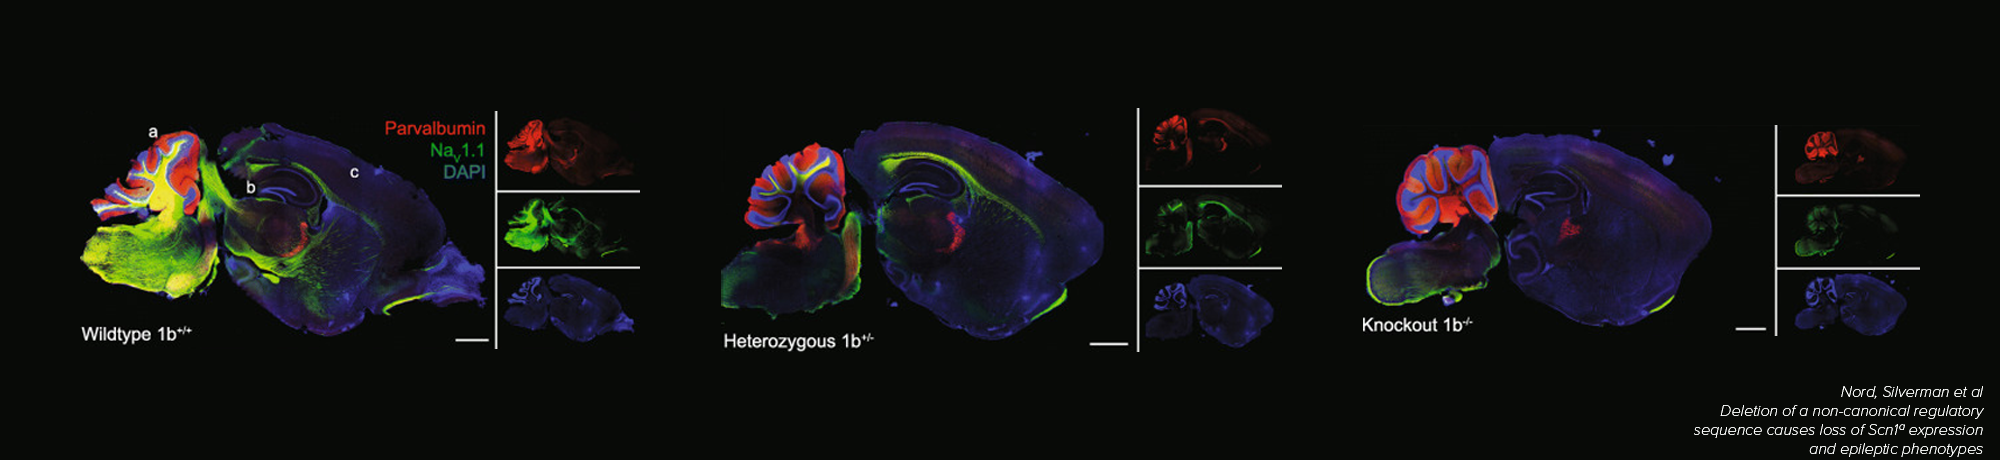 Fluorescently labeled brain sections